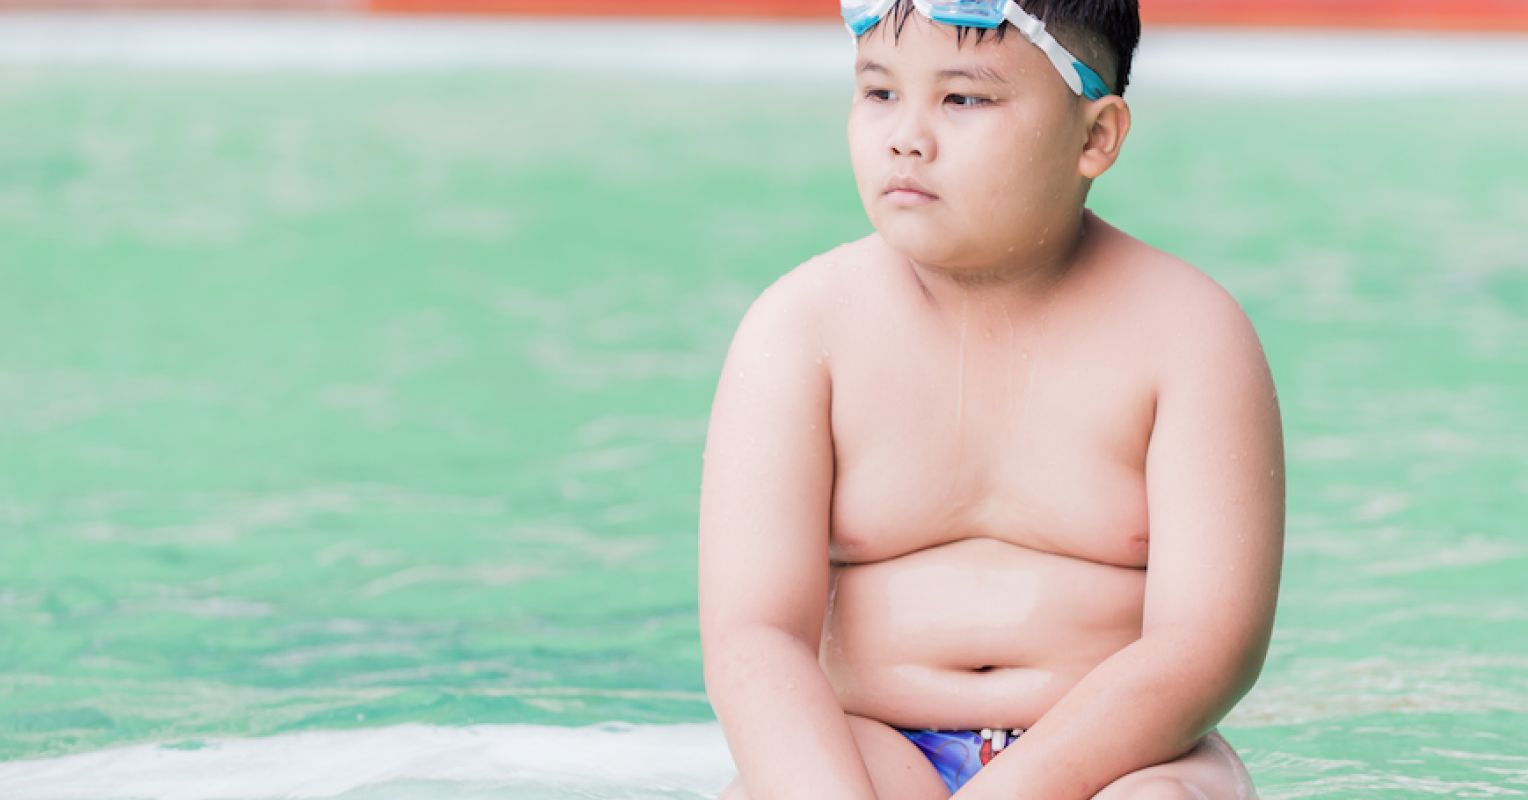 facts about fat kids' obesity and weight